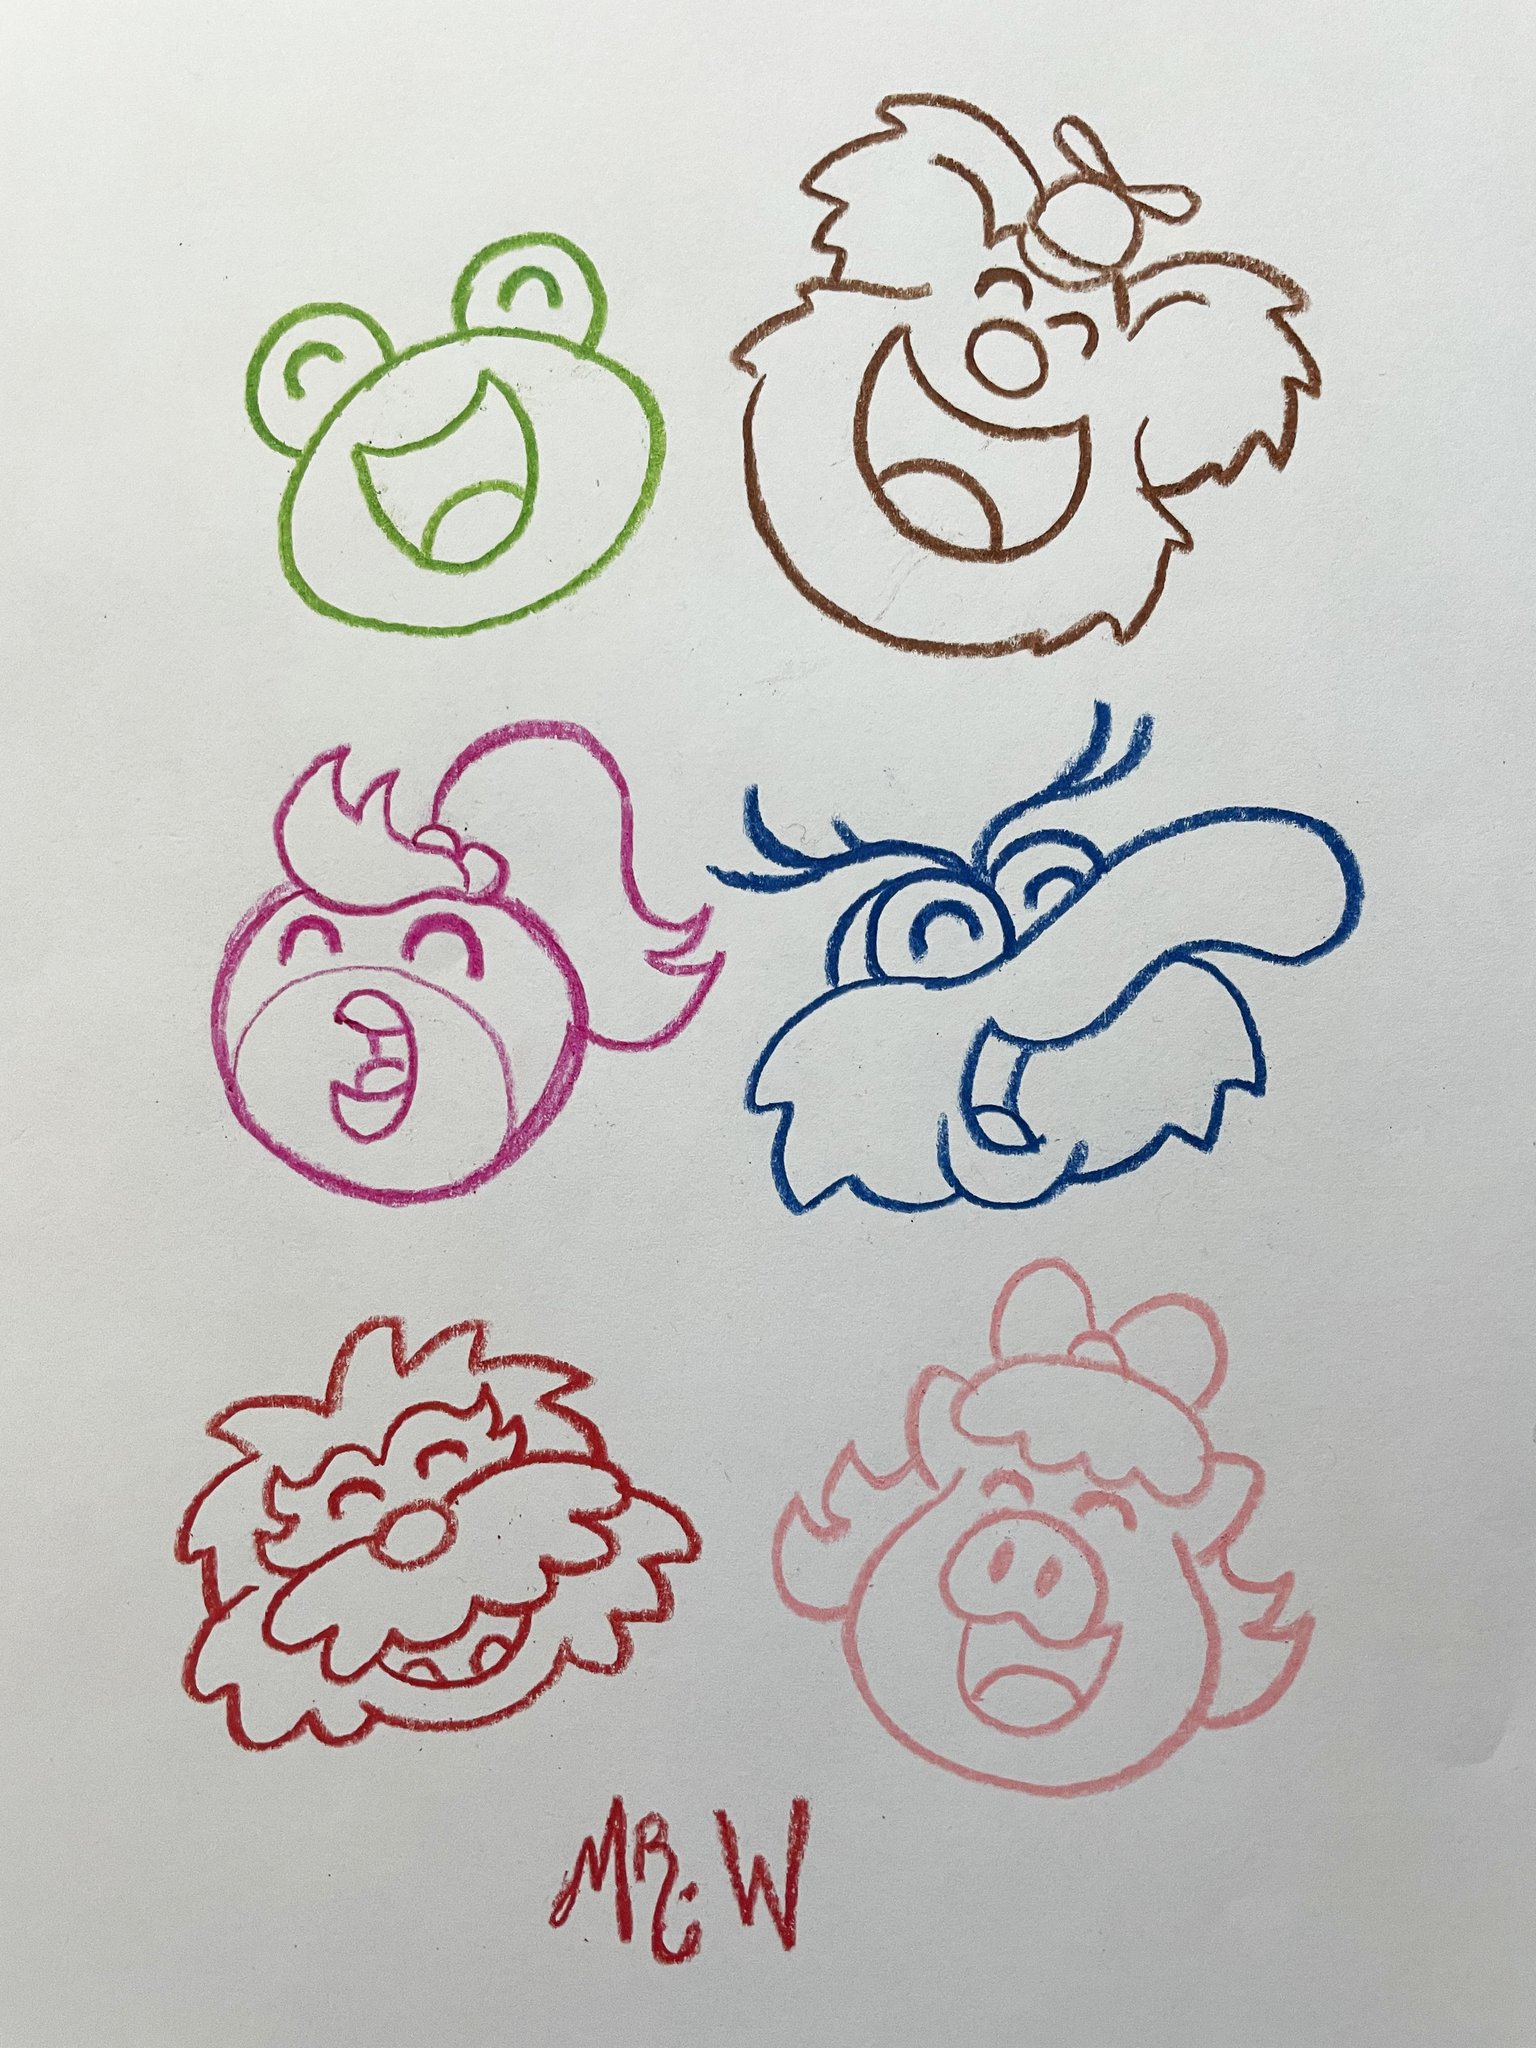 How to Draw The Muppets